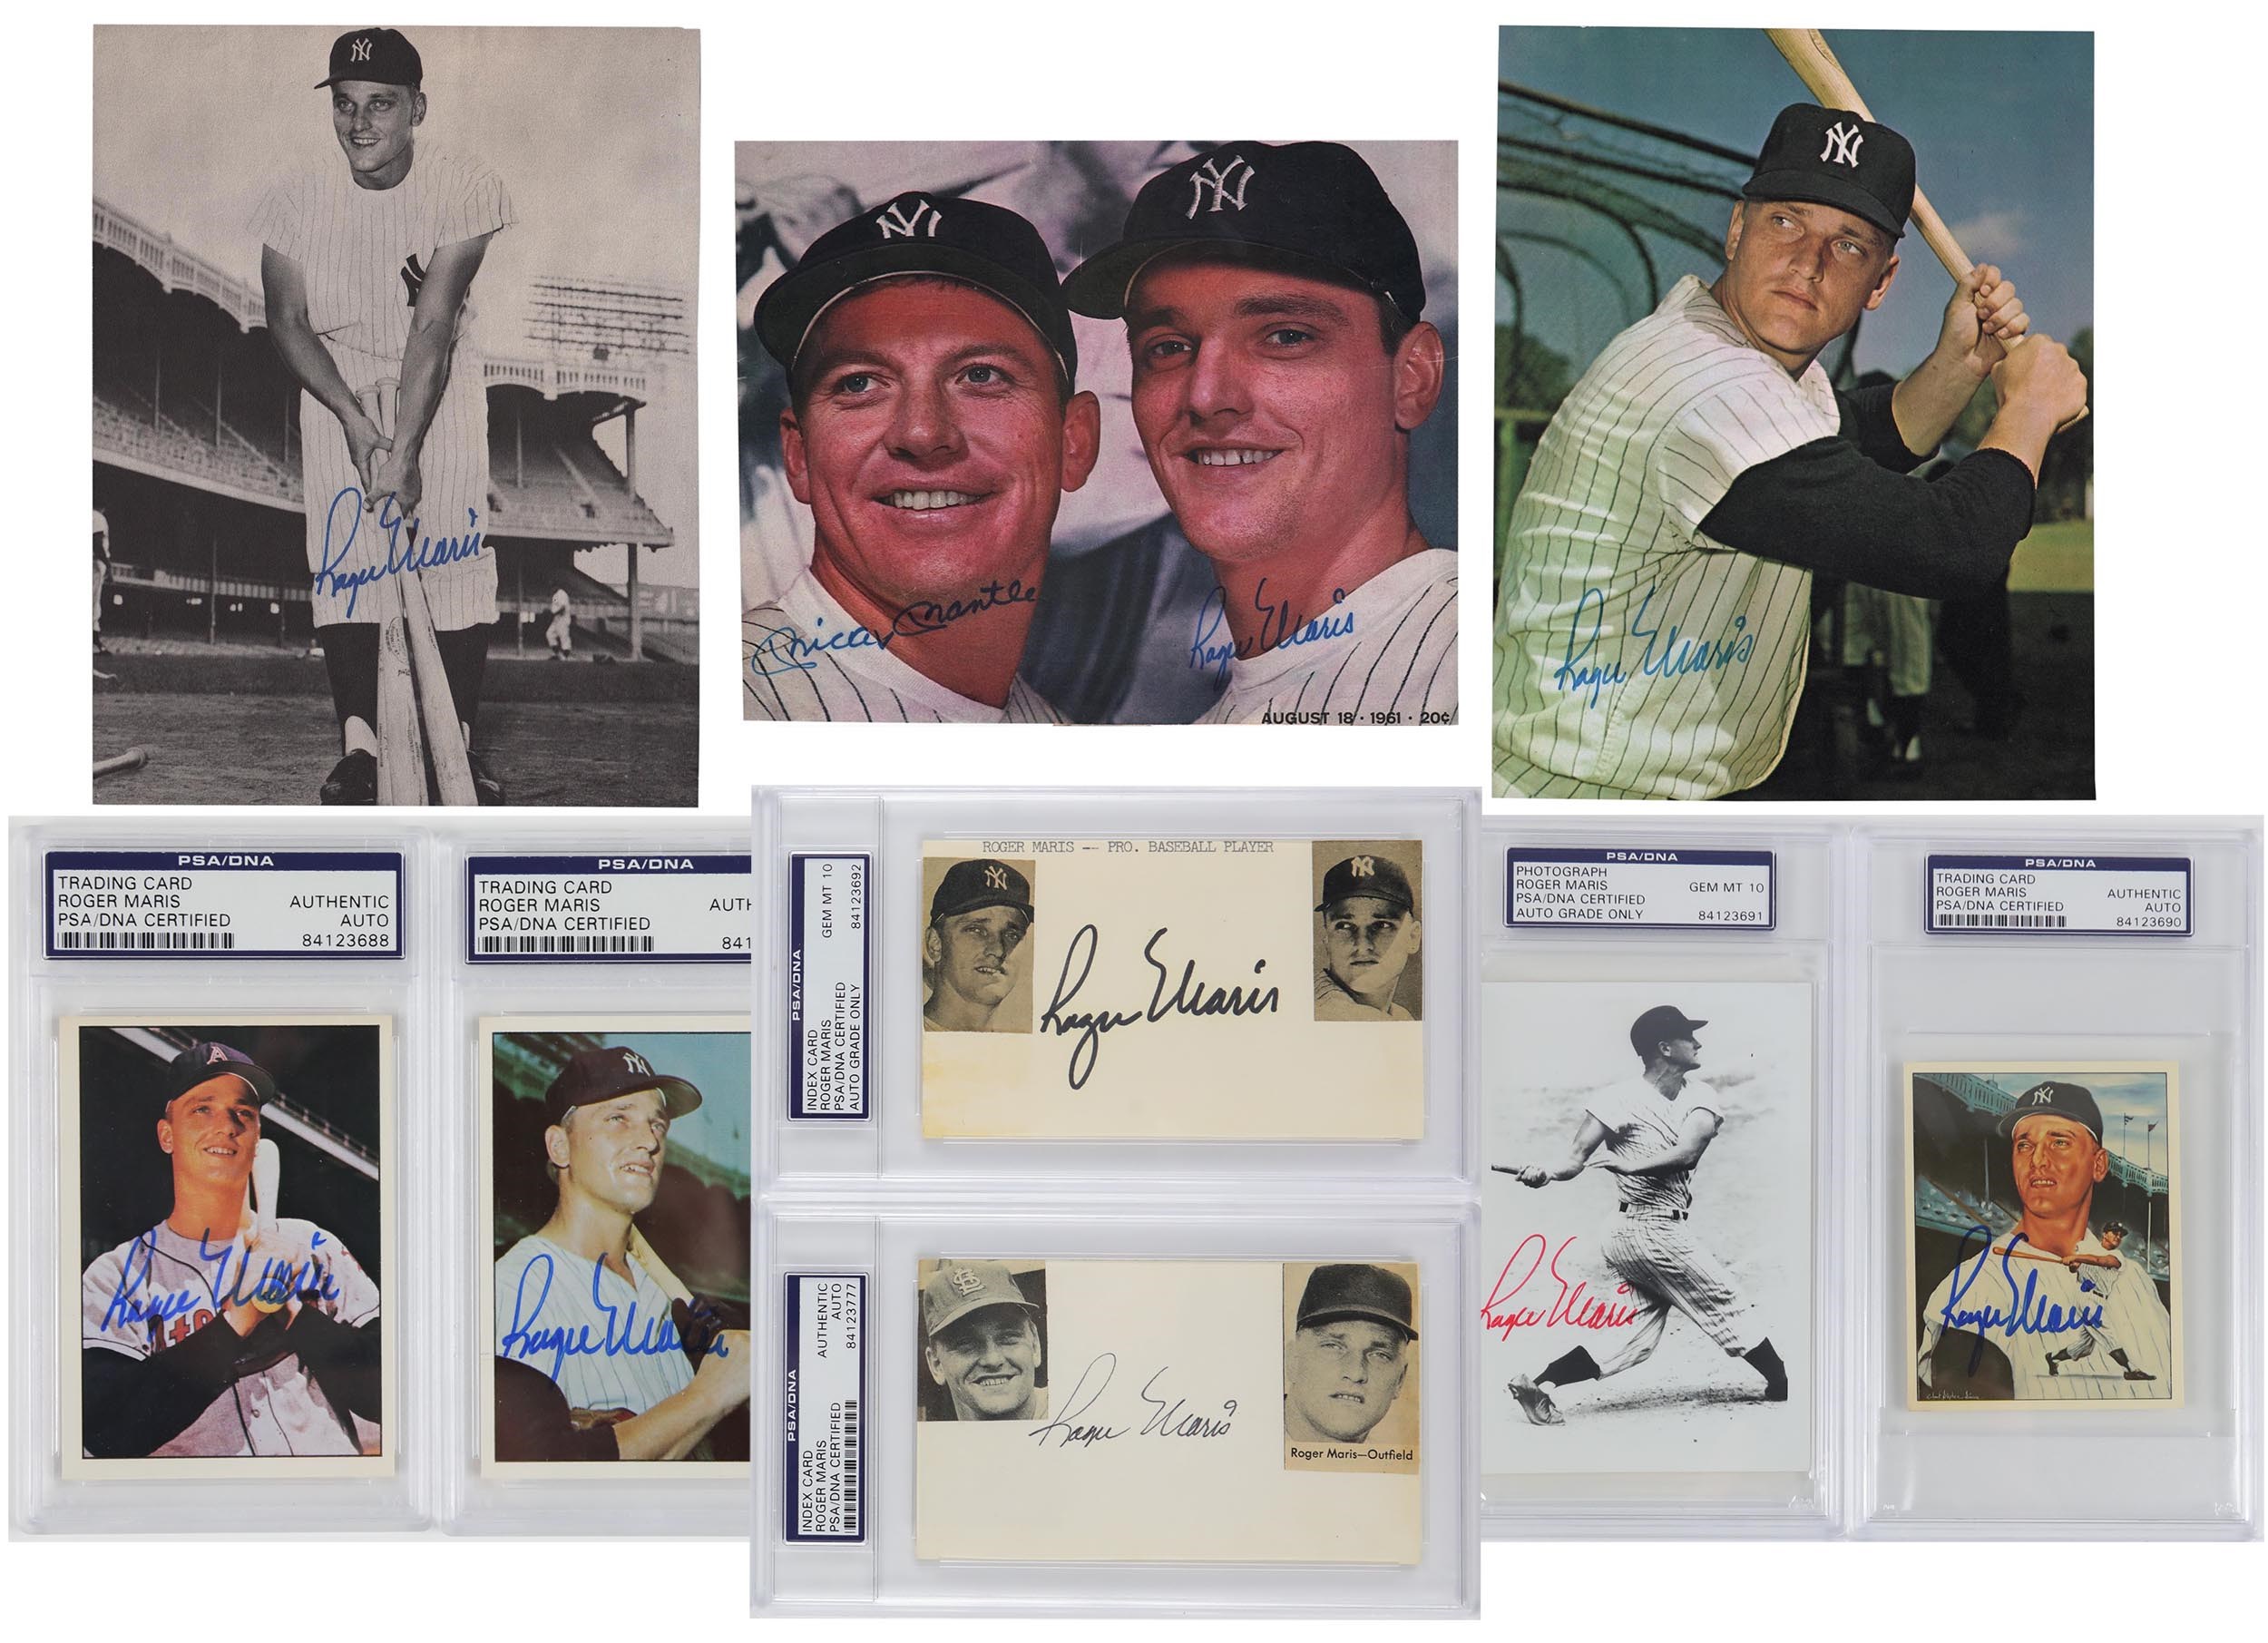 Quality Roger Maris Autograph Collection w/Mantle & Maris Photo - All PSA Certified (9)